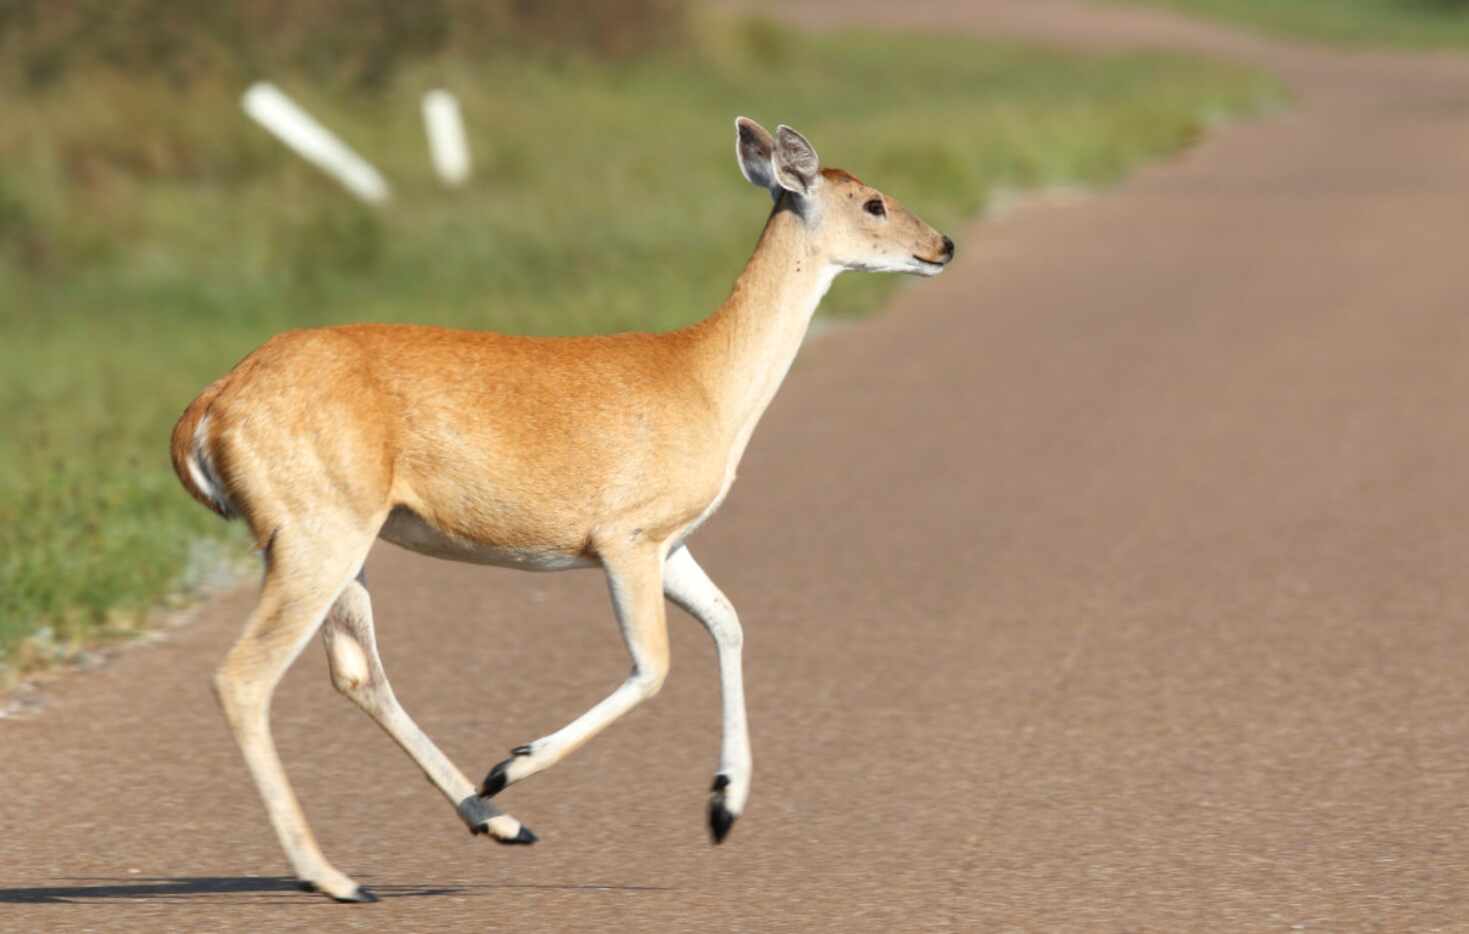 A White-tailed deer runs across the road at the Aransas National Wildlife Refuge in...